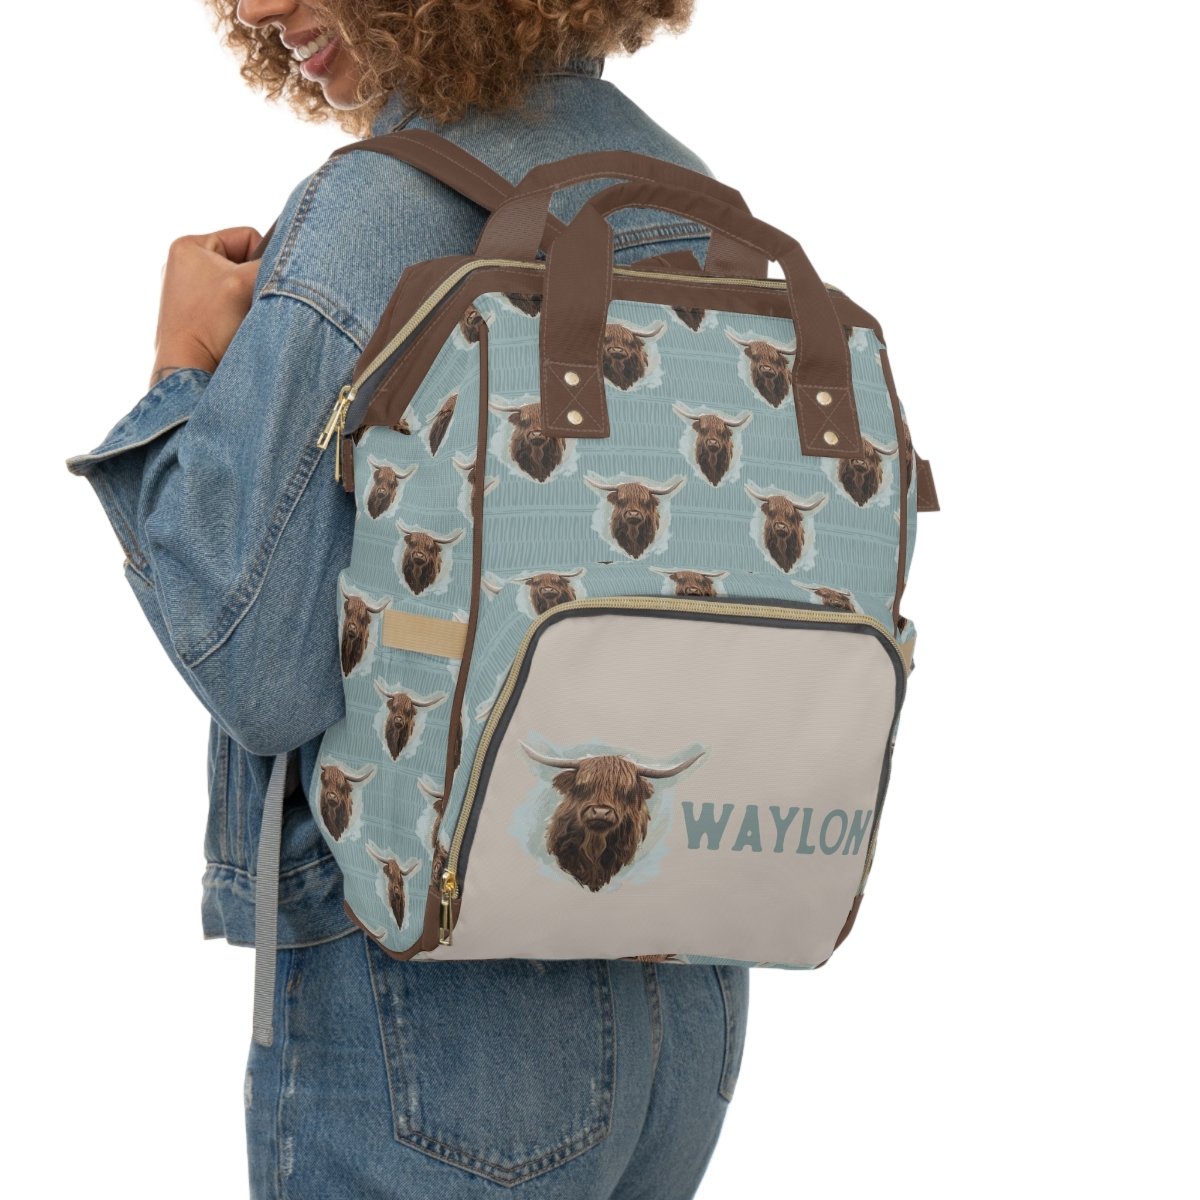 Highland Cow Boy Personalized Backpack Diaper Bag - gender_boy, Highland Cow Boy, text